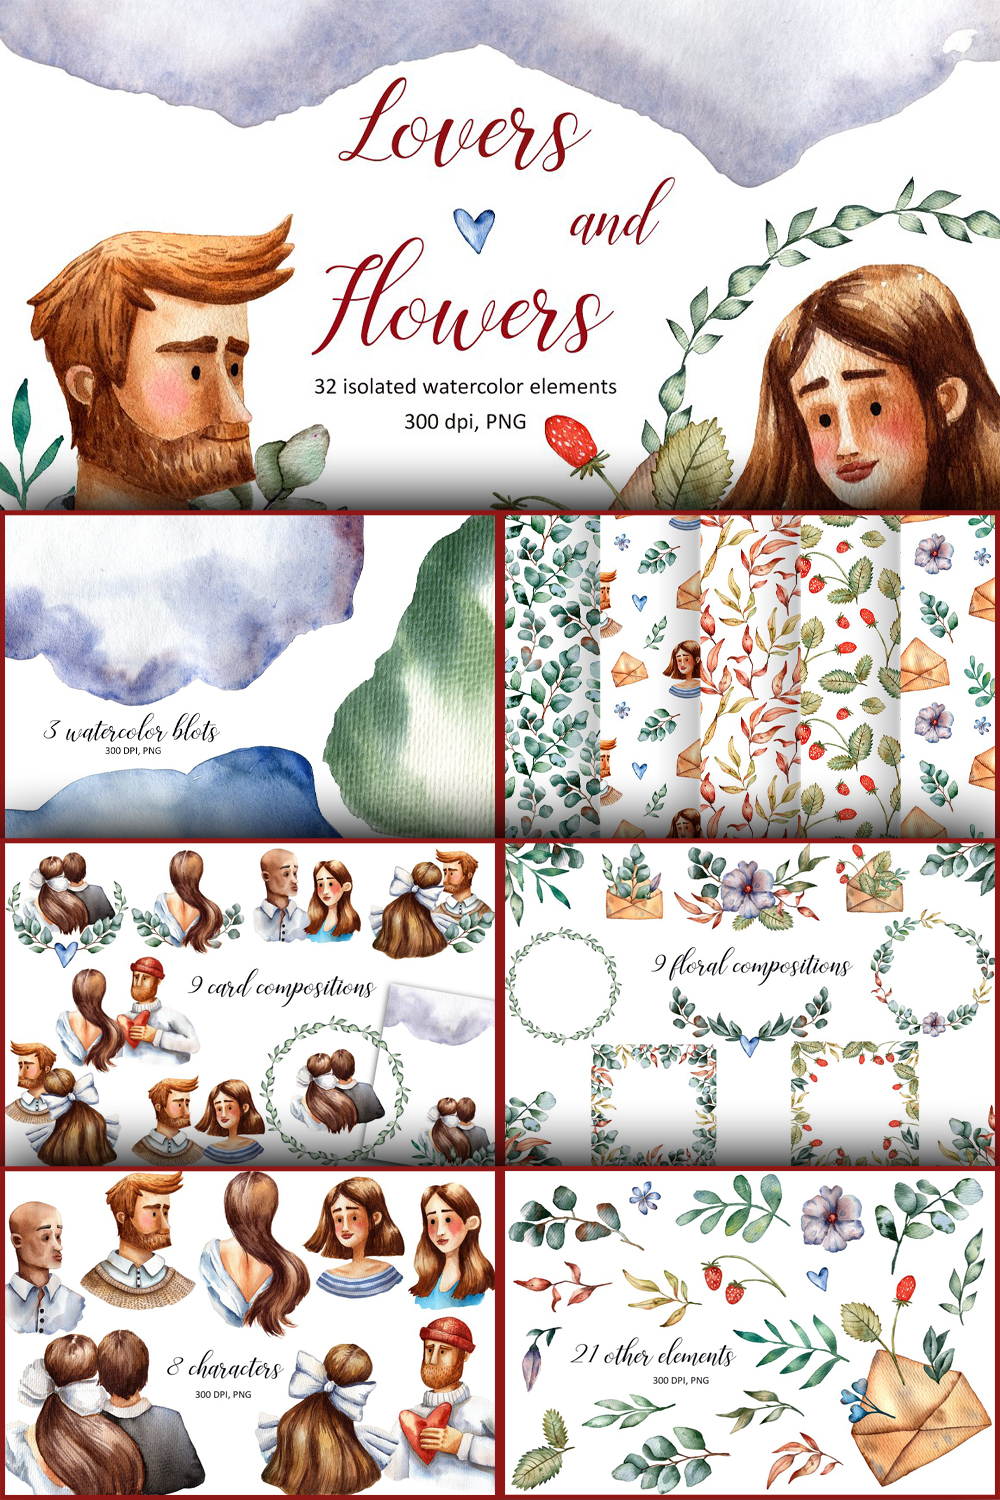 Lovers and flowers watercolor set of pinterest.